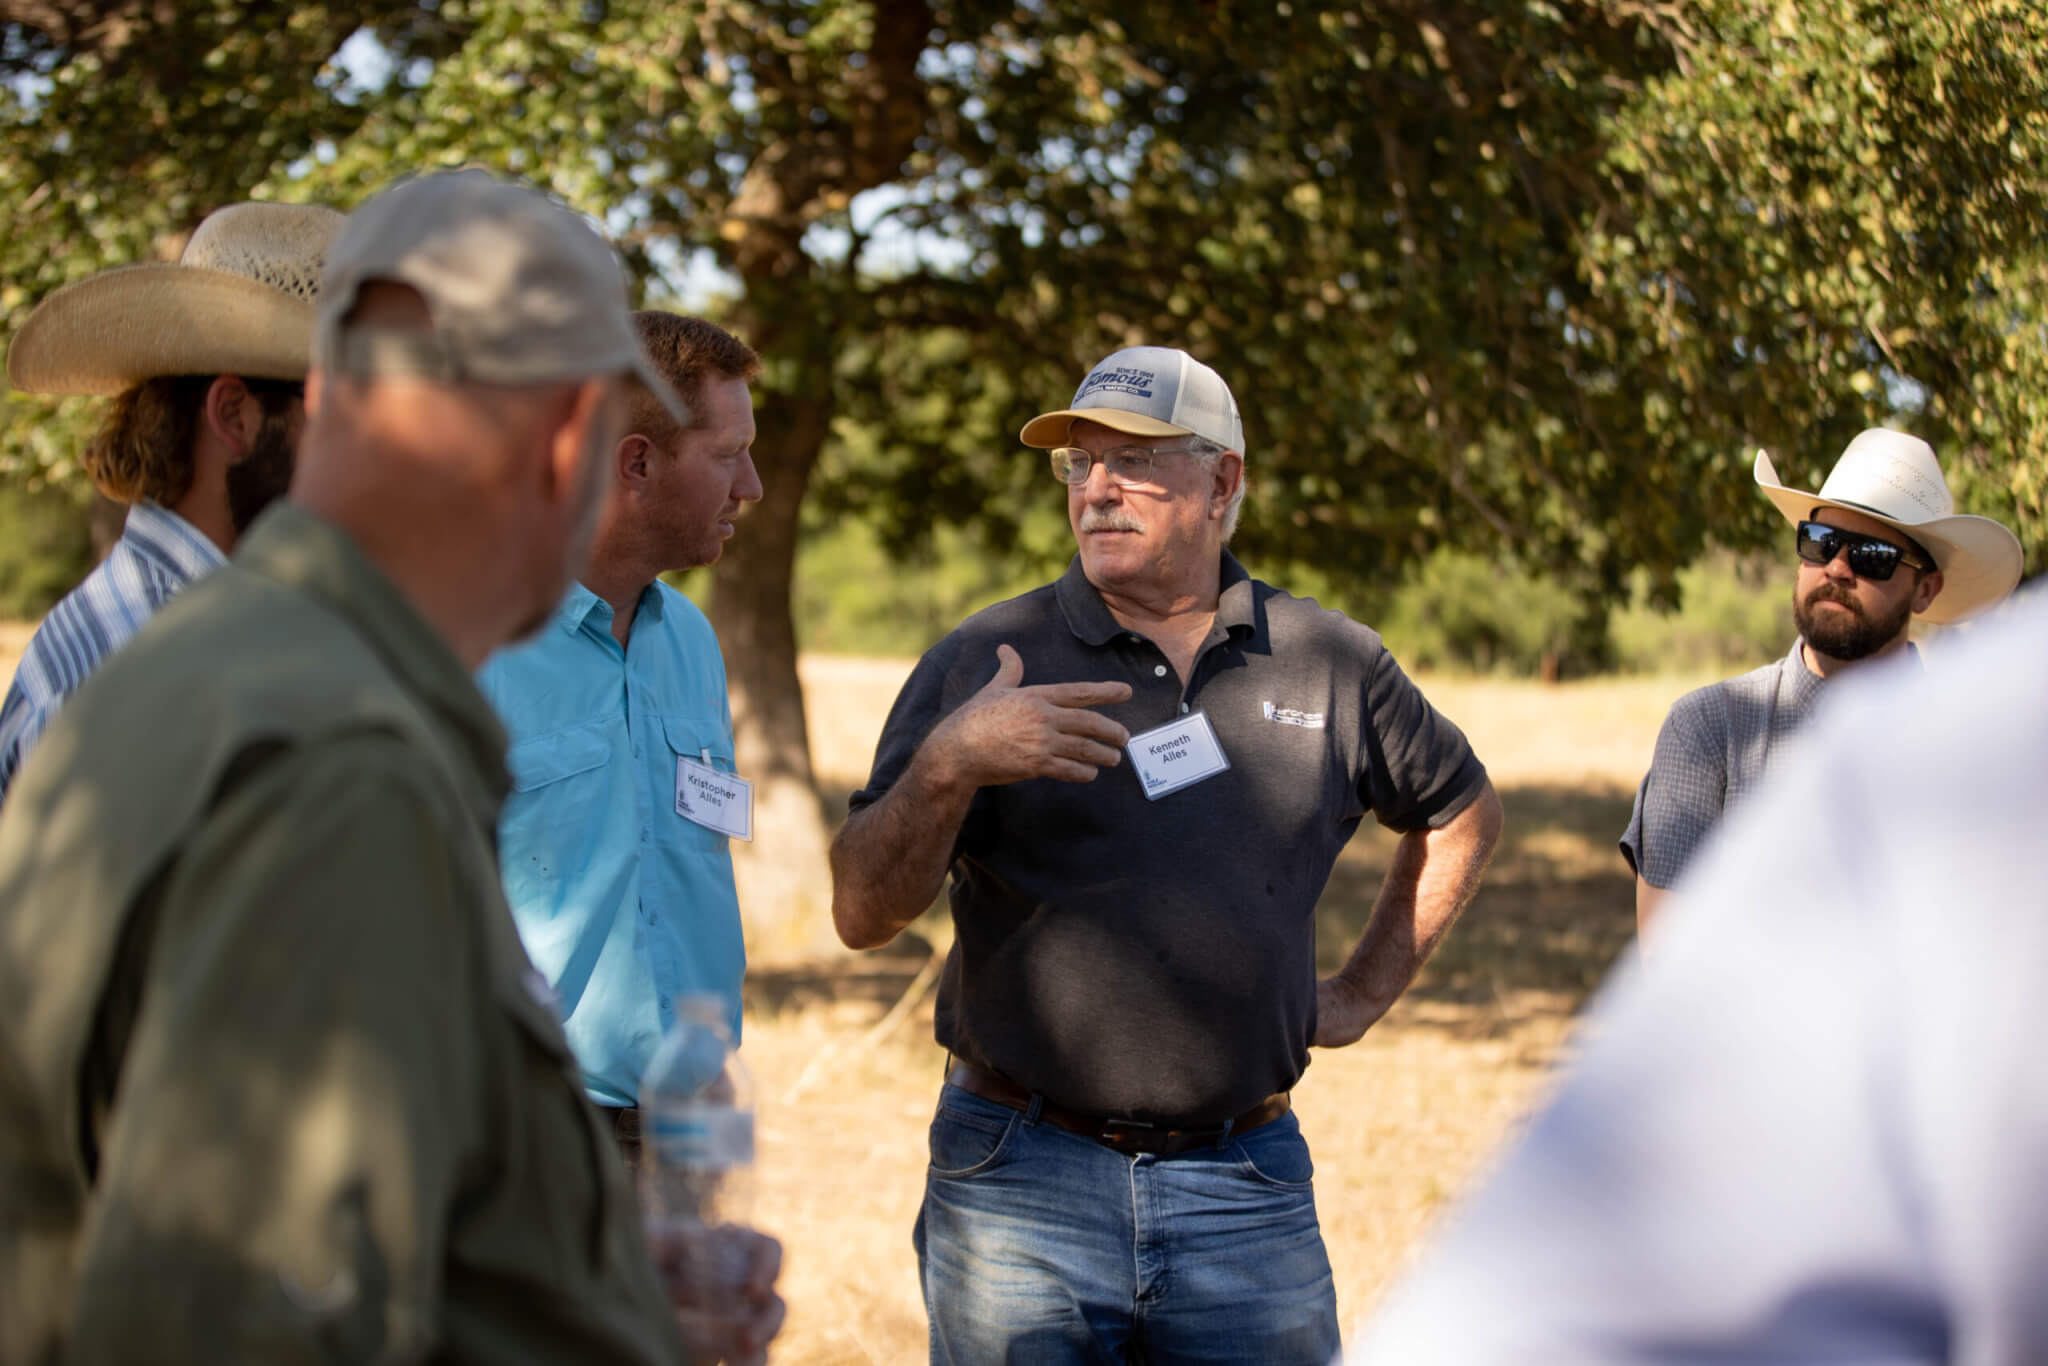 Ranchers Kristopher and Kenneth Alles of Jacksboro, Texas, discuss regenerative ranching practices at the first Essentials of Regenerative Ranching course offered by Noble Research Institute.